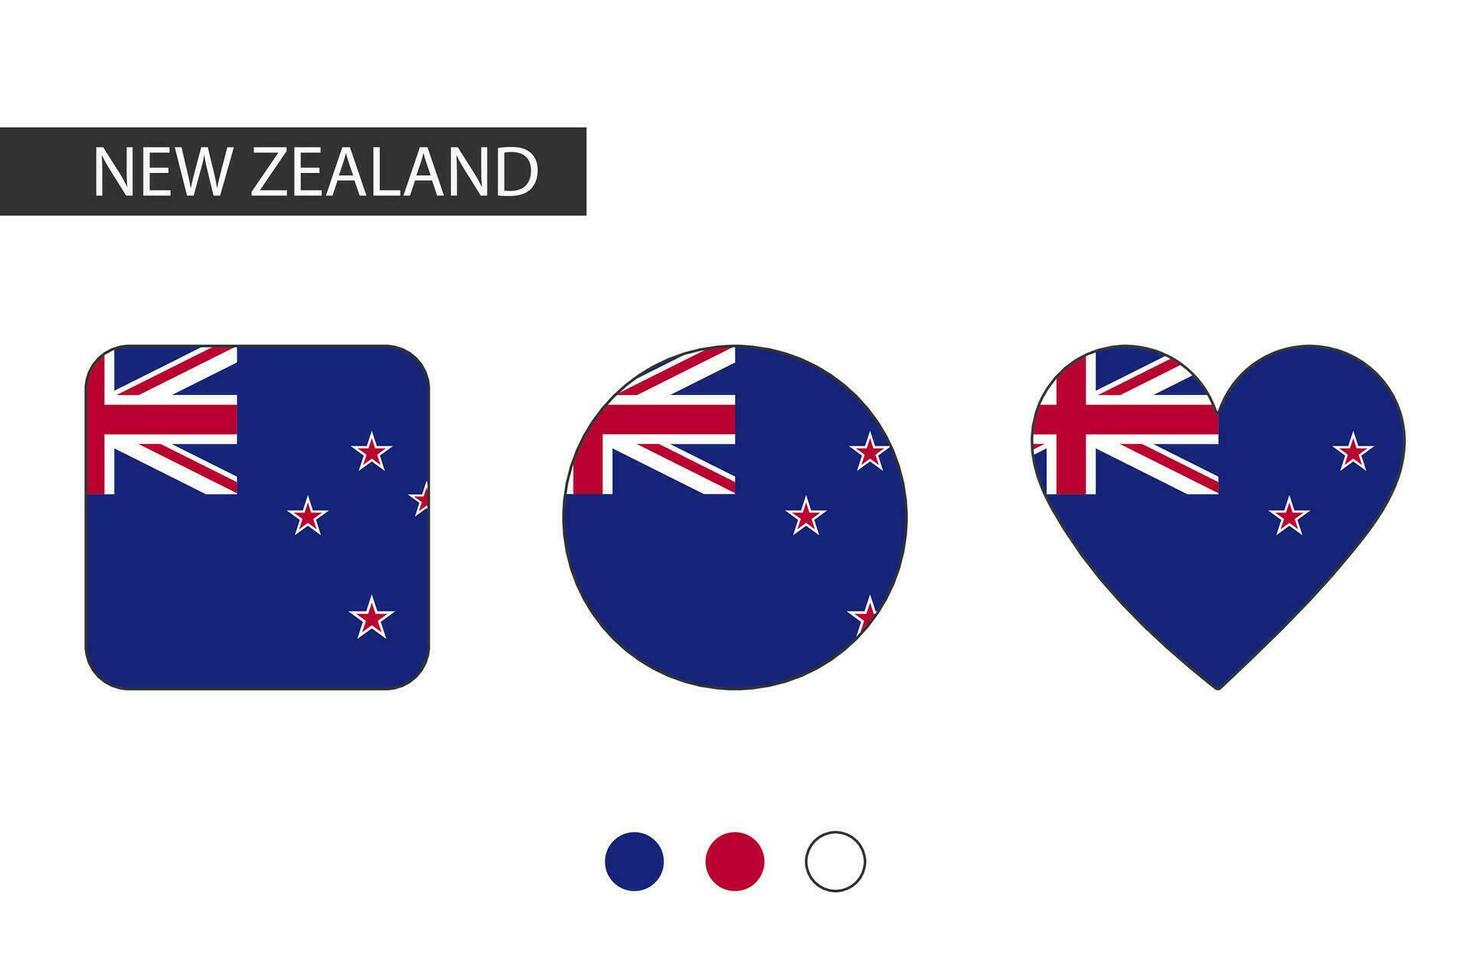 New Zealand 3 shapes square, circle, heart with city flag. Isolated on white background. vector